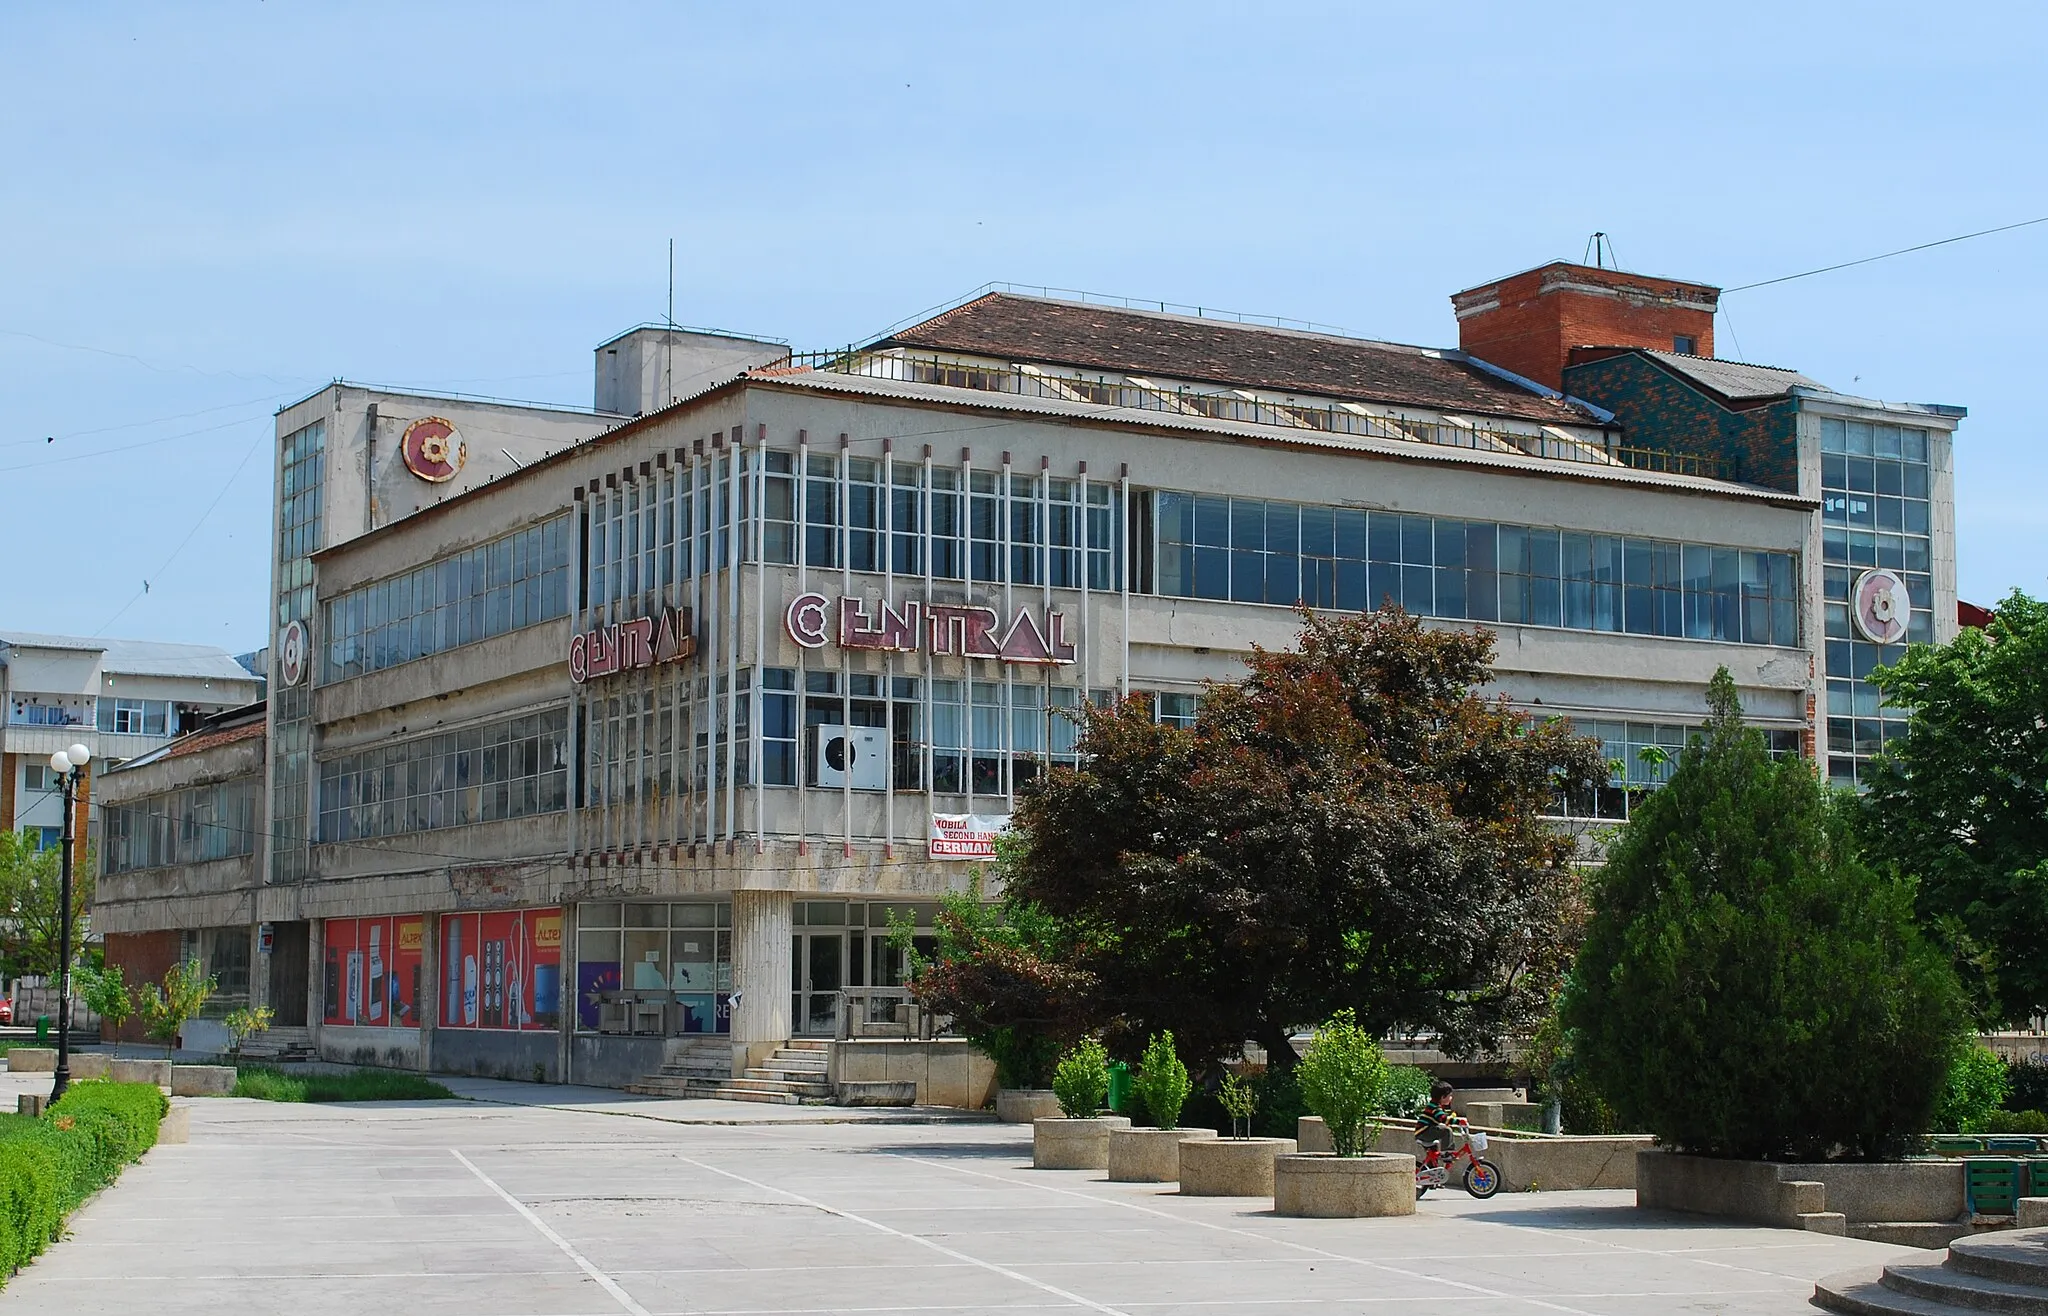 Photo showing: The abandoned "Central" mall in Caracal, Romania